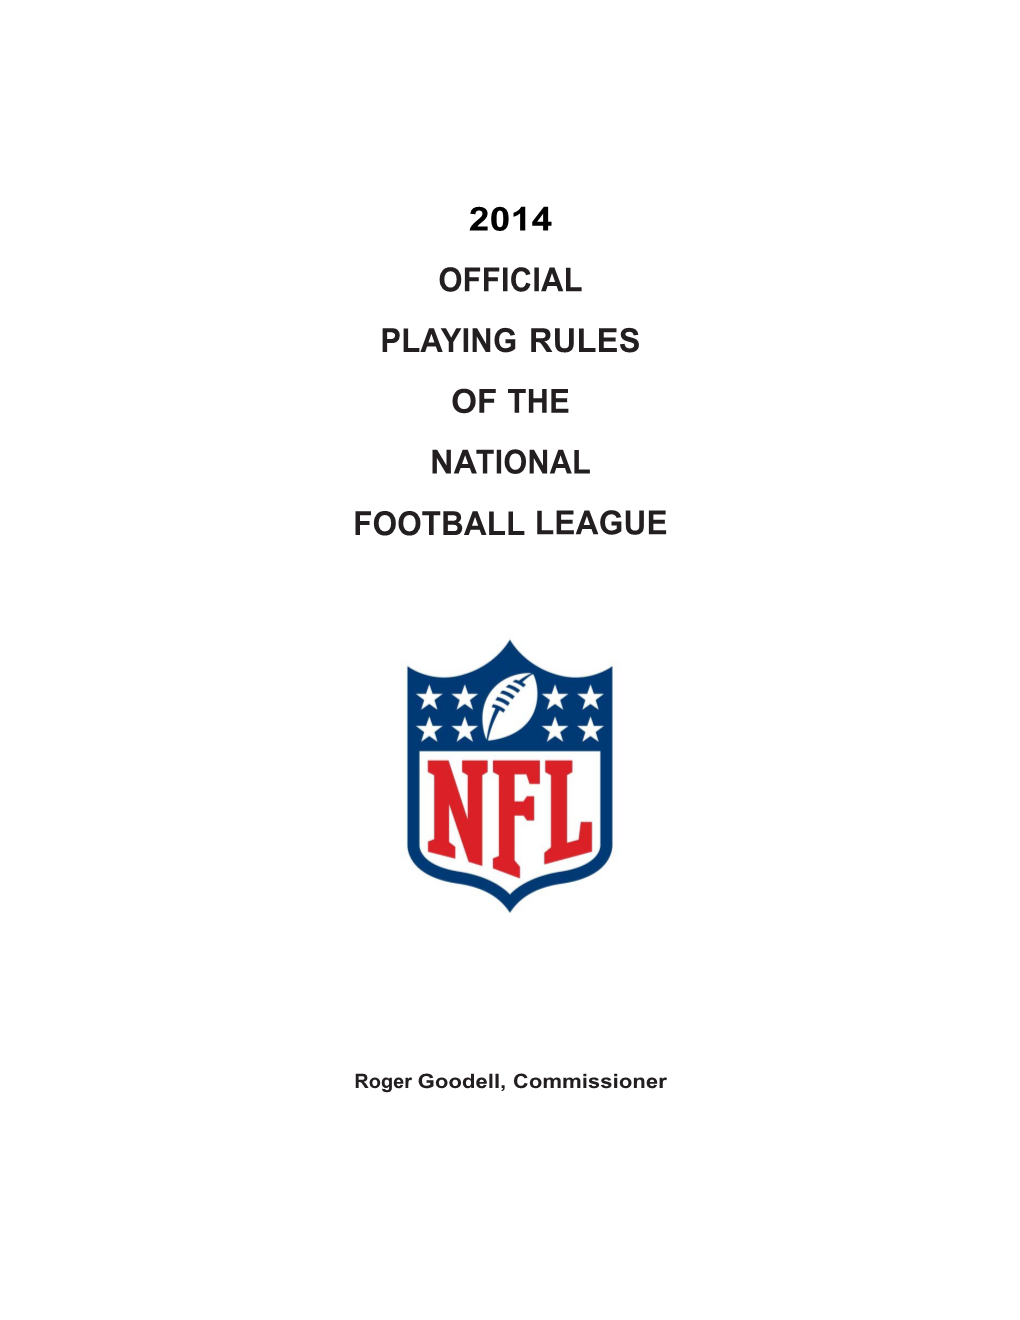 Rule Book, It Is an Institutional Term of Art Pertaining Strictly to Actions That Violate NFL Playing Rules